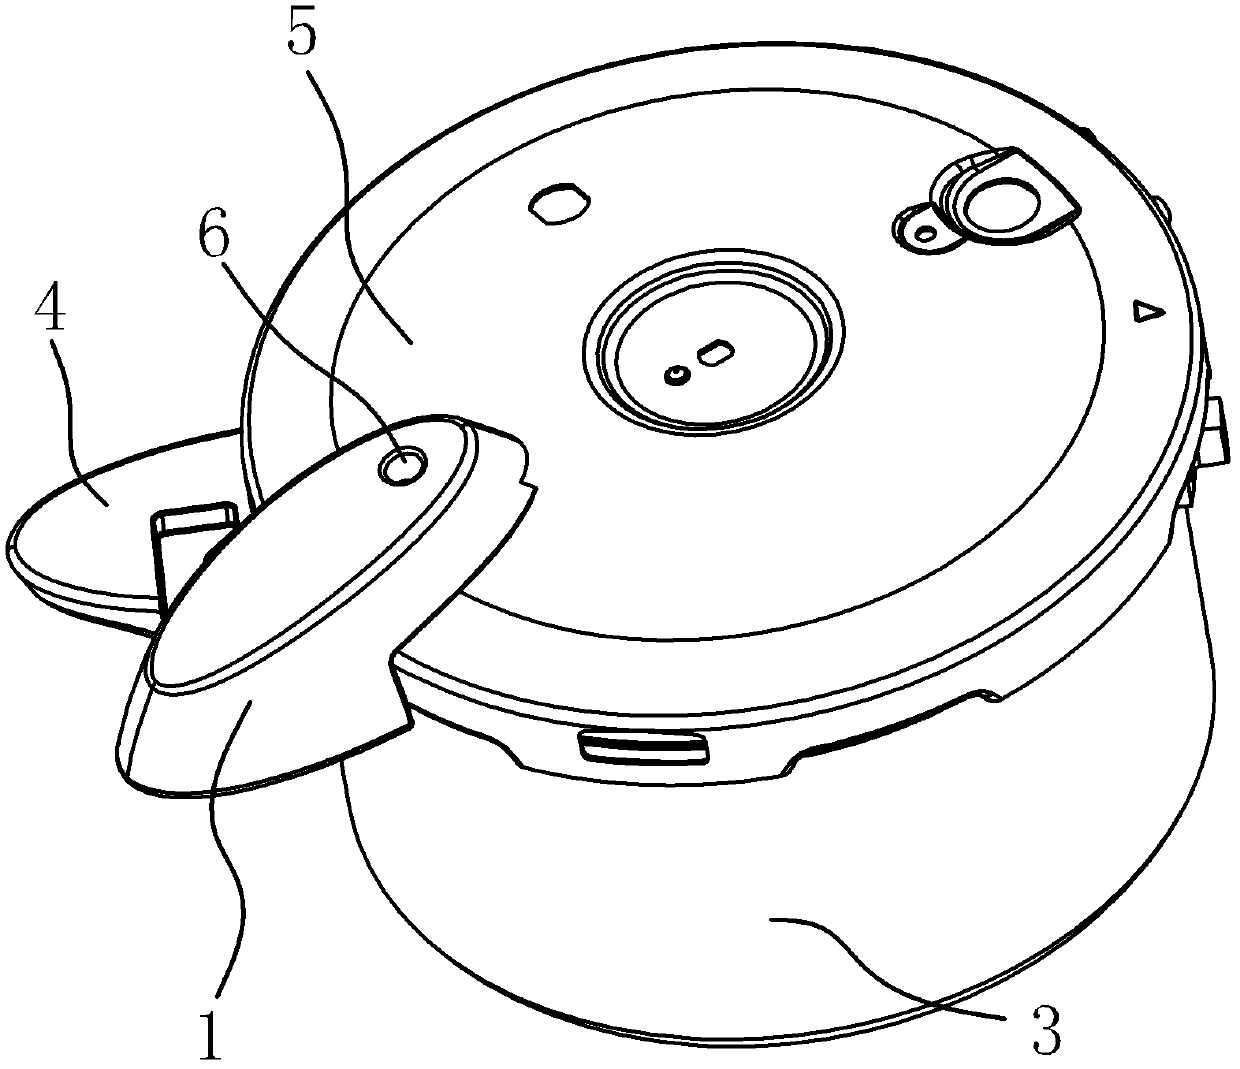 Cover opening and closing safety device of pressure cooker